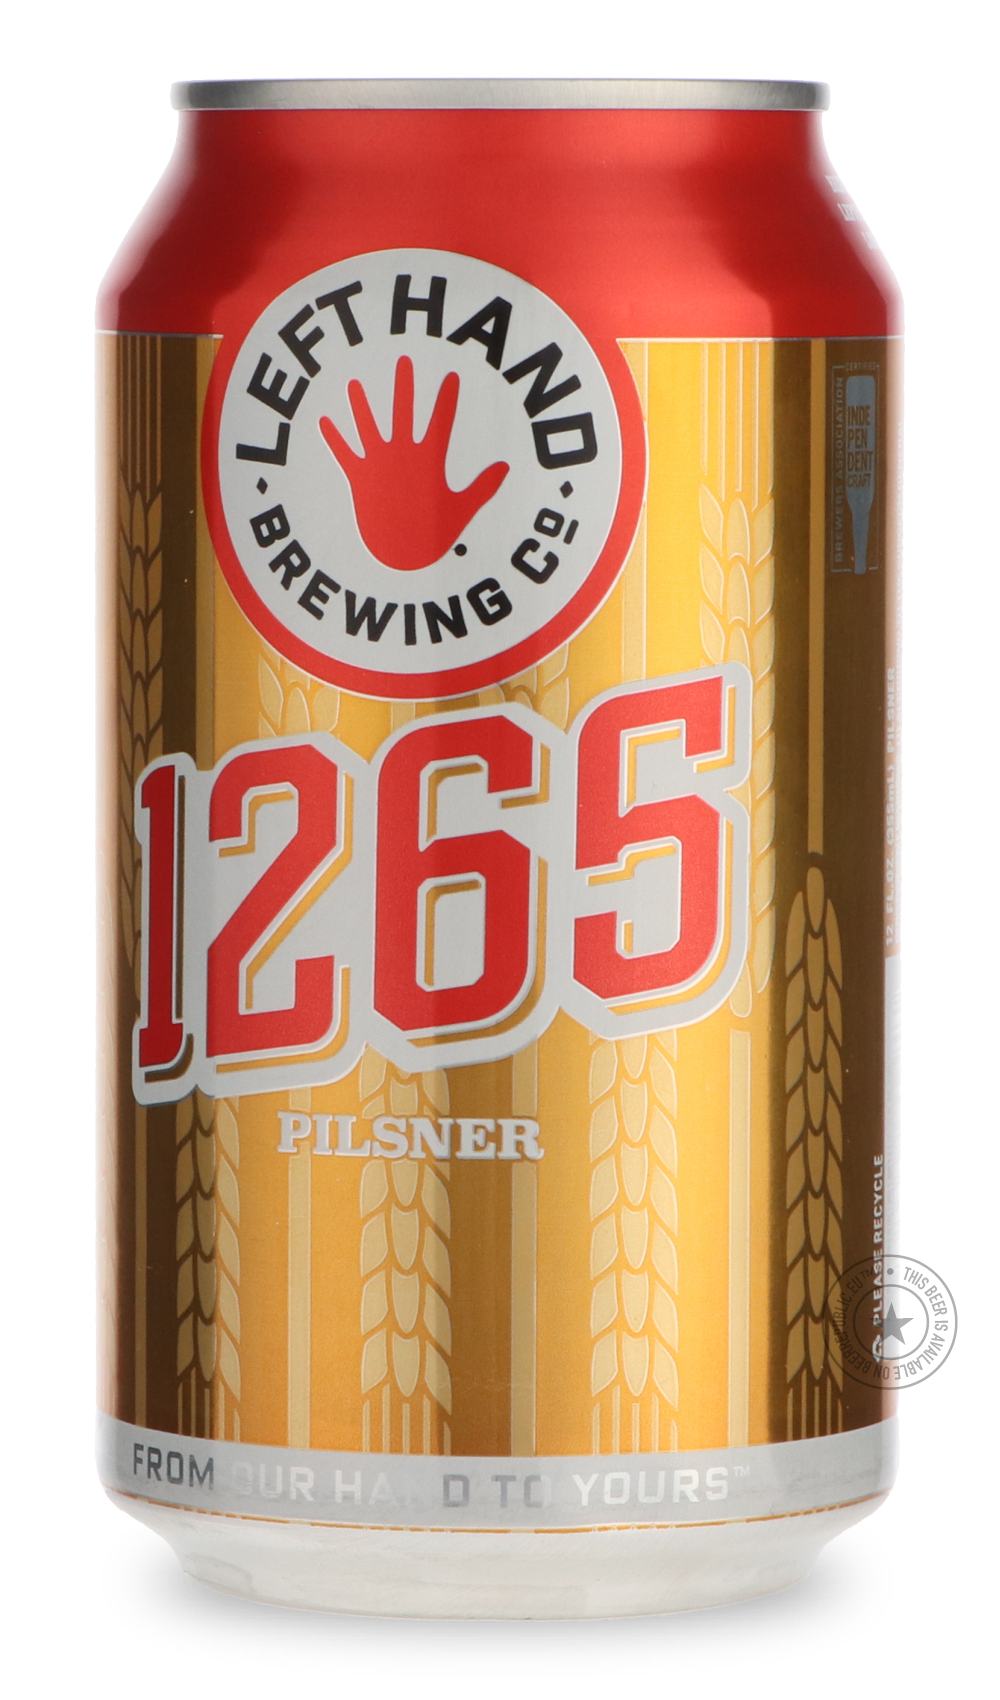 -Left Hand- 1265-Pale- Only @ Beer Republic - The best online beer store for American & Canadian craft beer - Buy beer online from the USA and Canada - Bier online kopen - Amerikaans bier kopen - Craft beer store - Craft beer kopen - Amerikanisch bier kaufen - Bier online kaufen - Acheter biere online - IPA - Stout - Porter - New England IPA - Hazy IPA - Imperial Stout - Barrel Aged - Barrel Aged Imperial Stout - Brown - Dark beer - Blond - Blonde - Pilsner - Lager - Wheat - Weizen - Amber - Barley Wine - Q